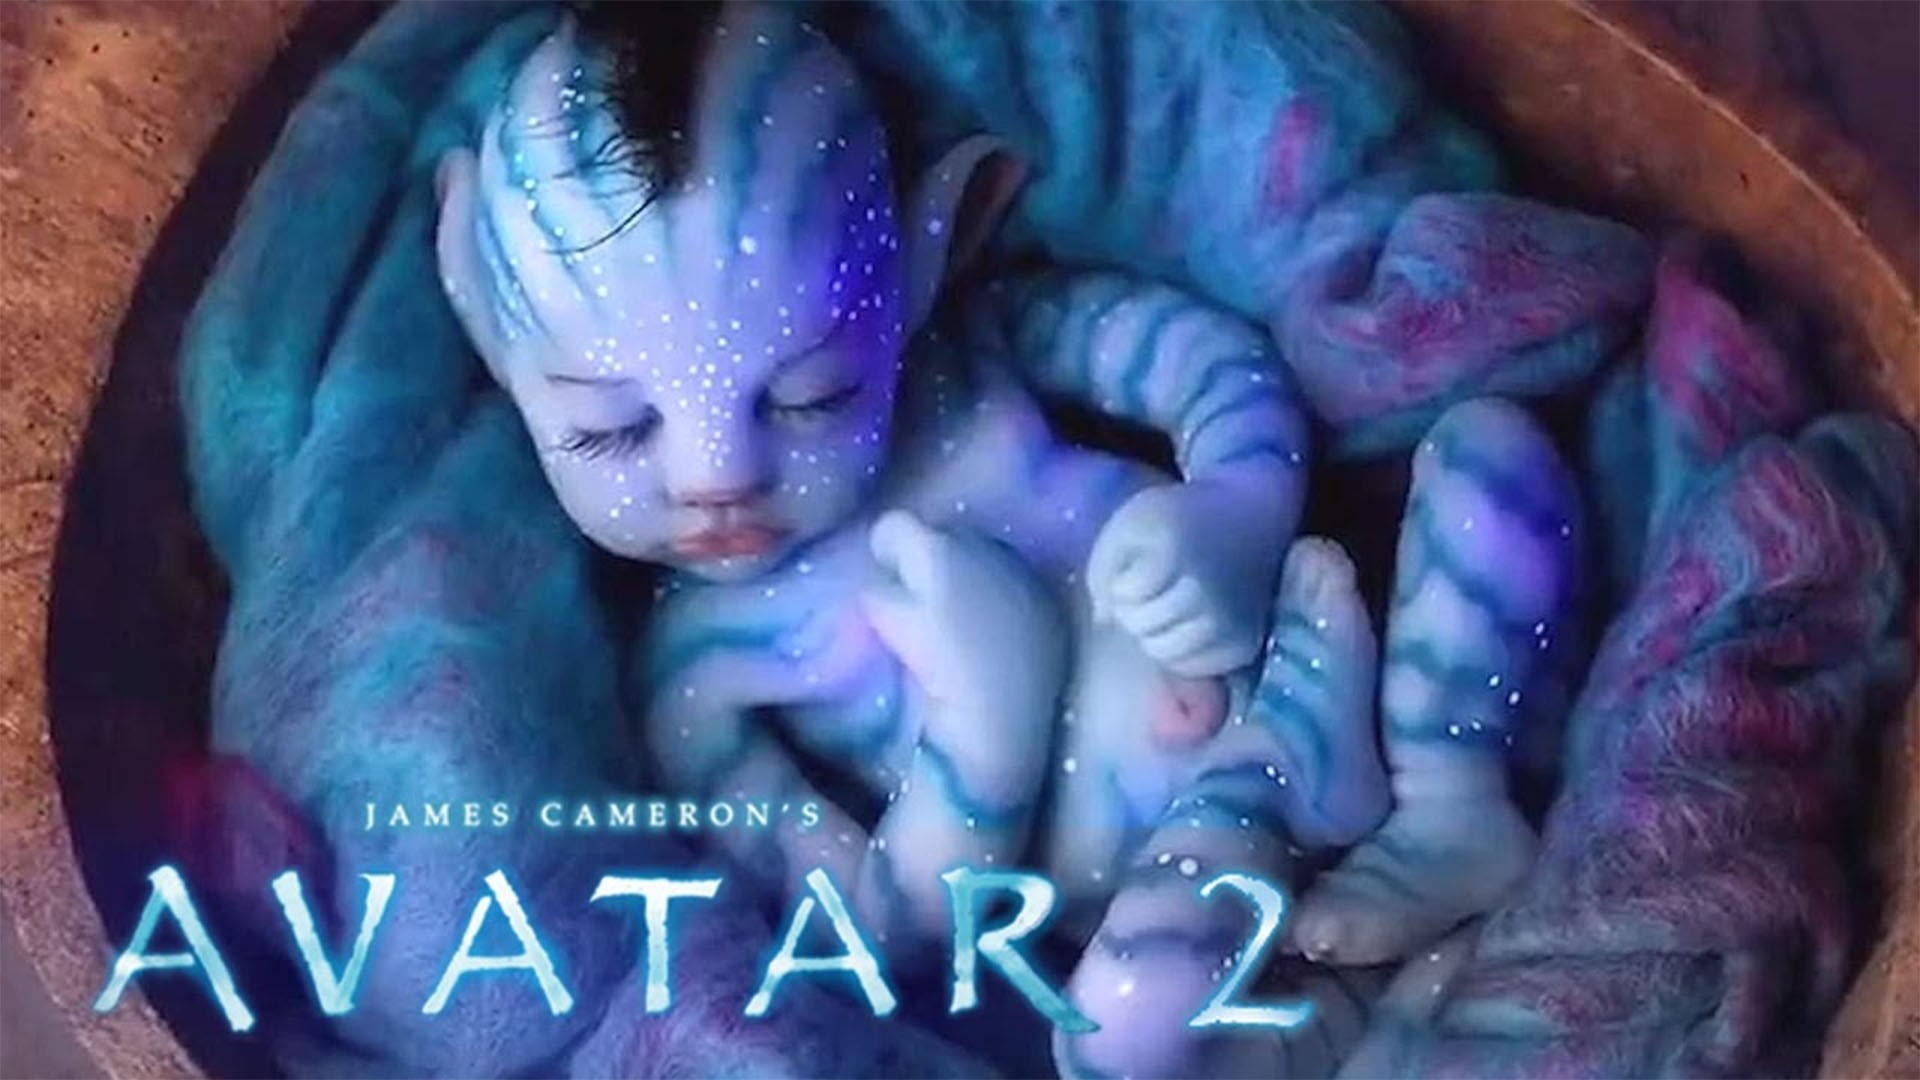 avatar 2 release date announced fans are thrilled